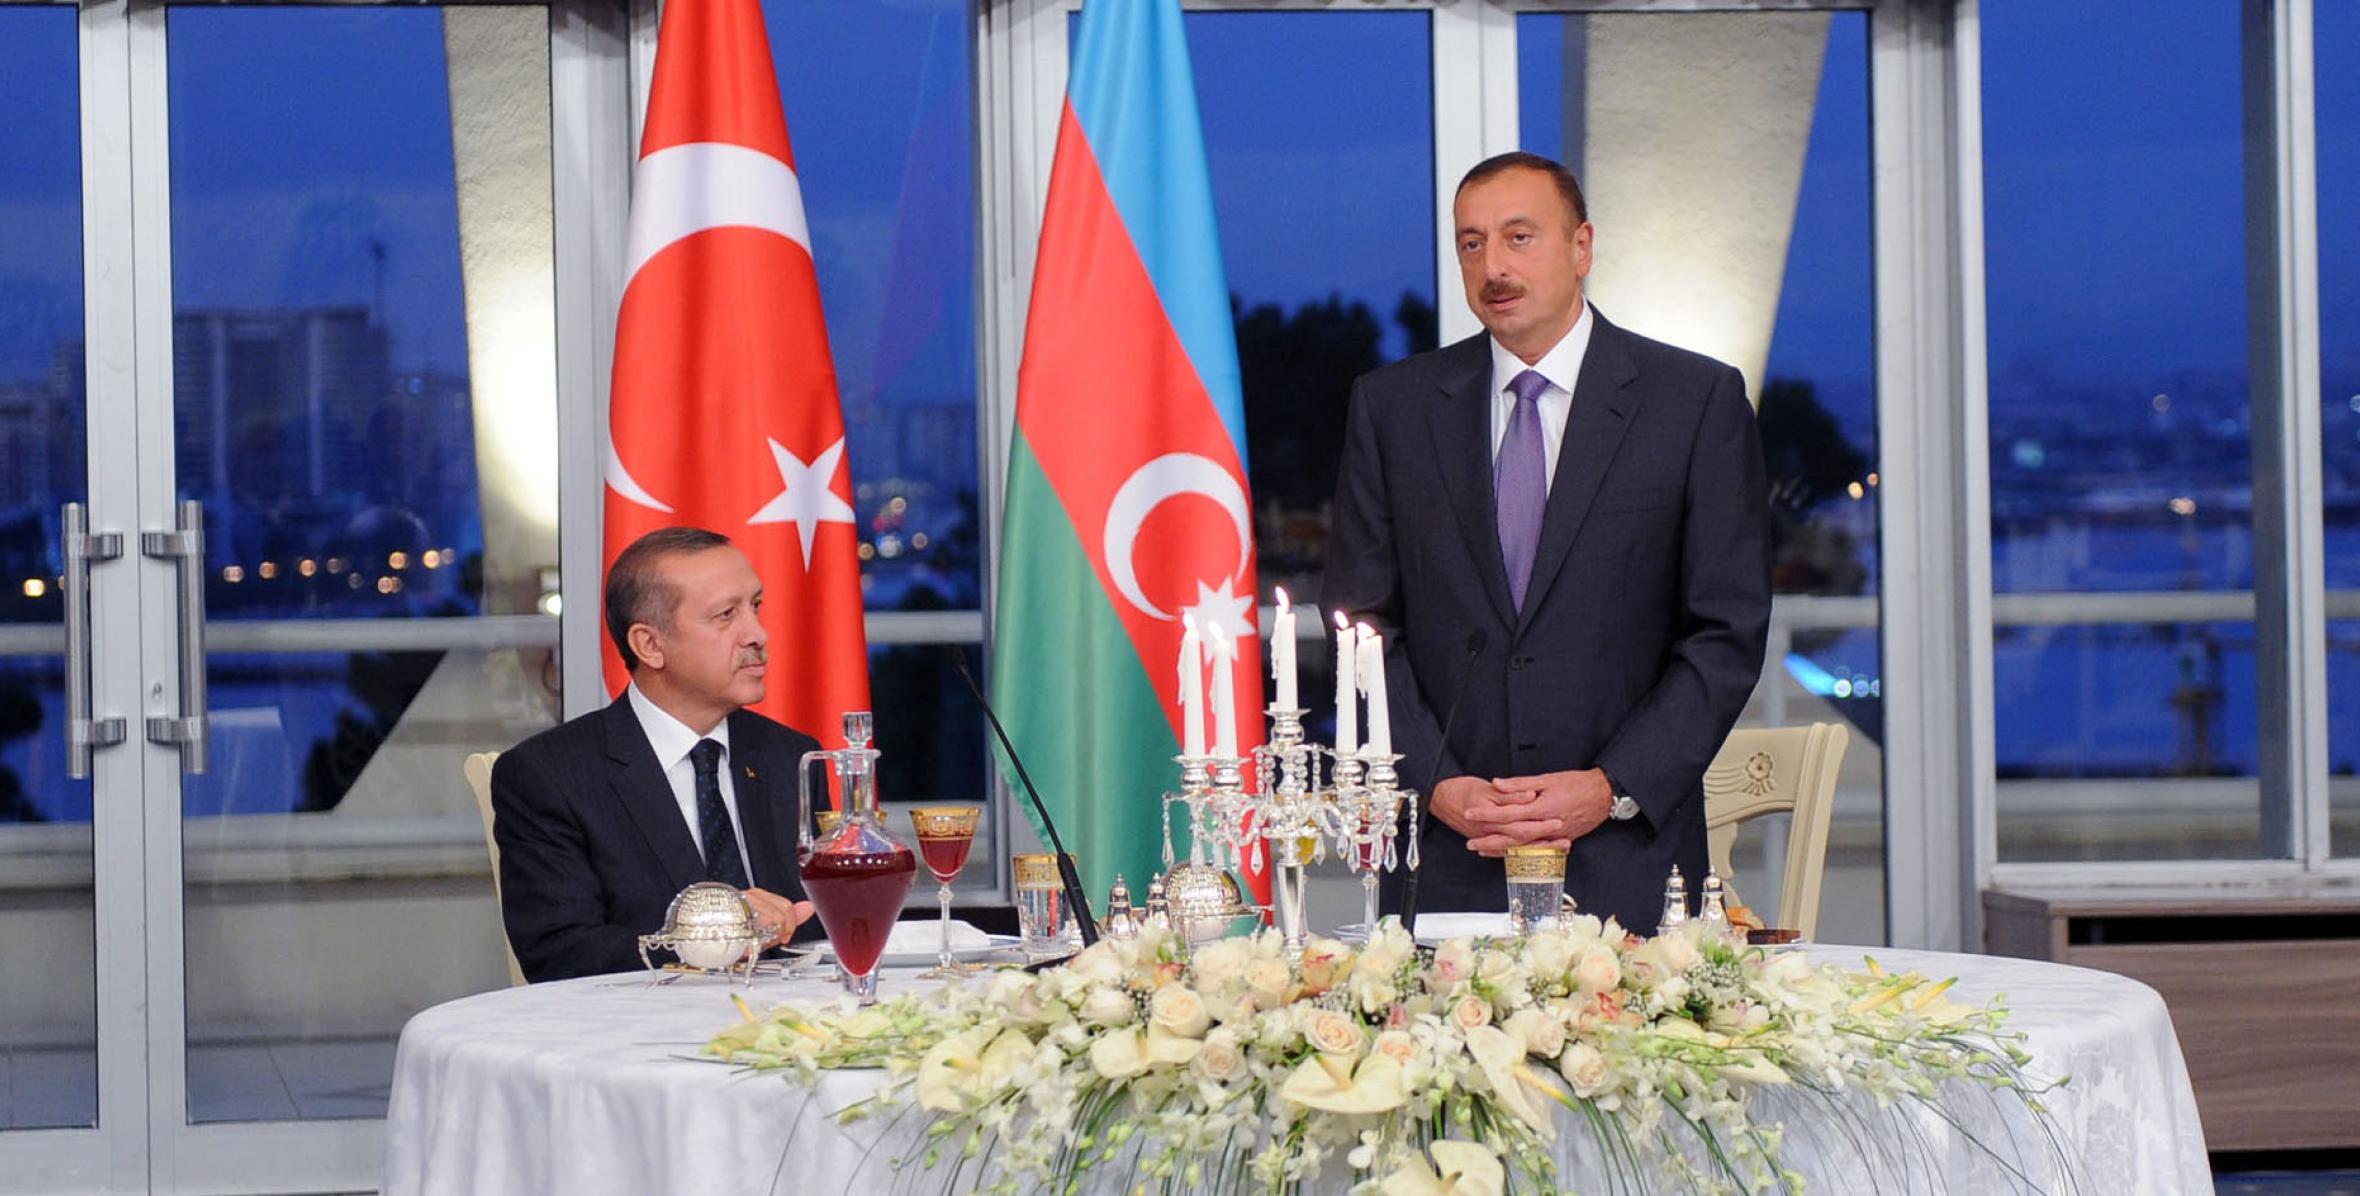 An official reception was hosted in honor of Turkish Prime Minister Recep Tayyip Erdogan